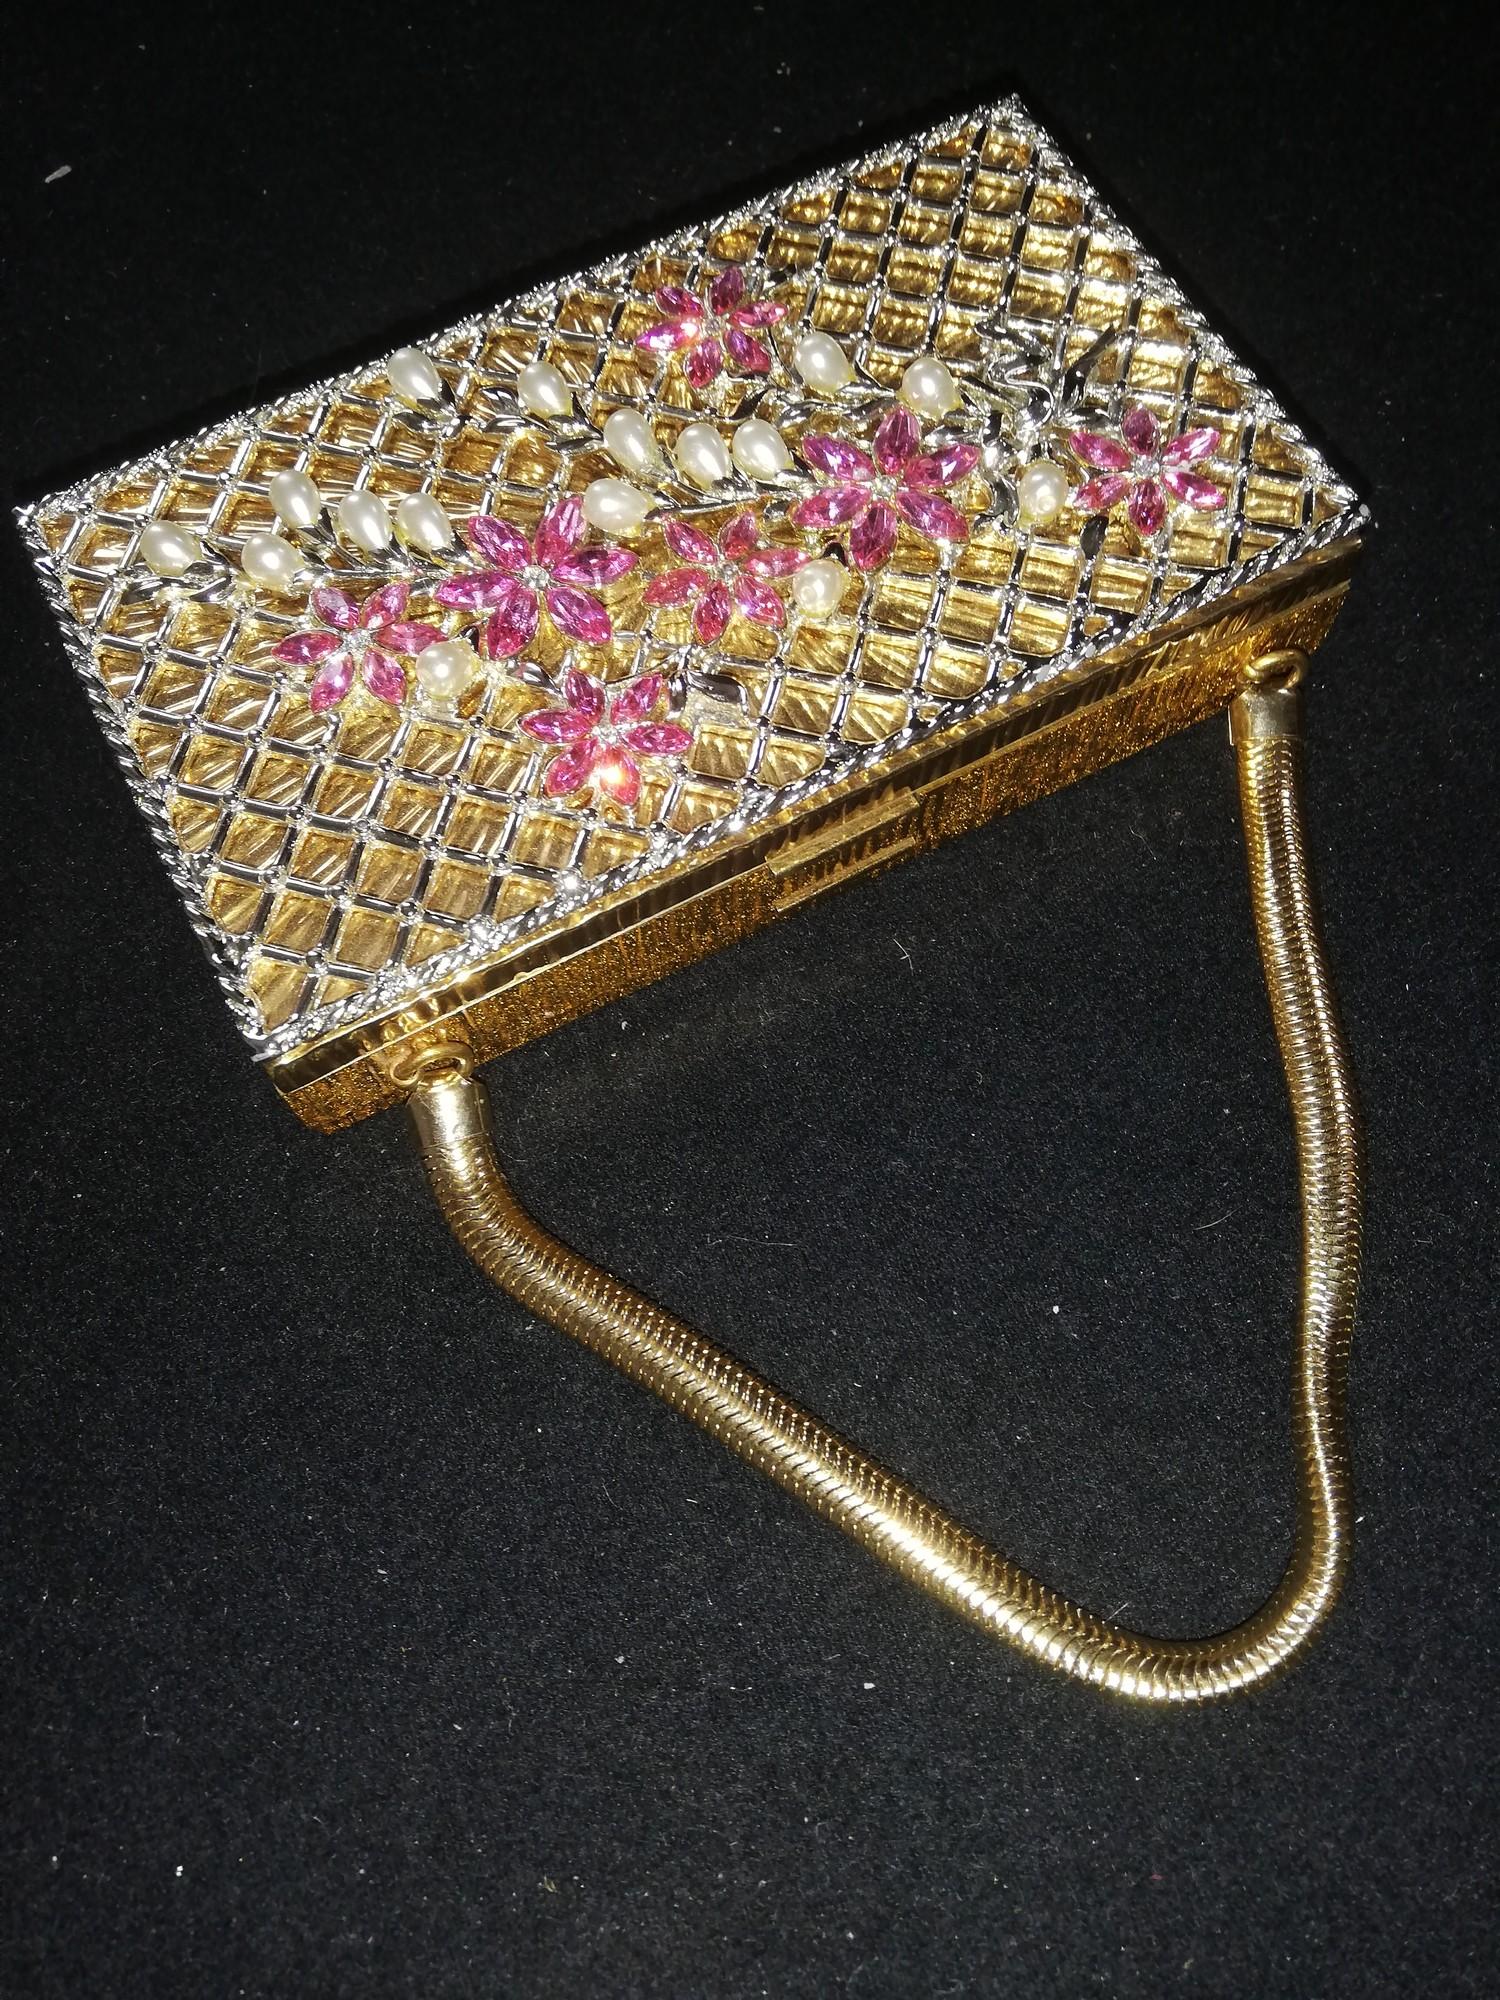 1950's American 2 part vanity case / carryall made from gilt metal & set with pink stones and pearls